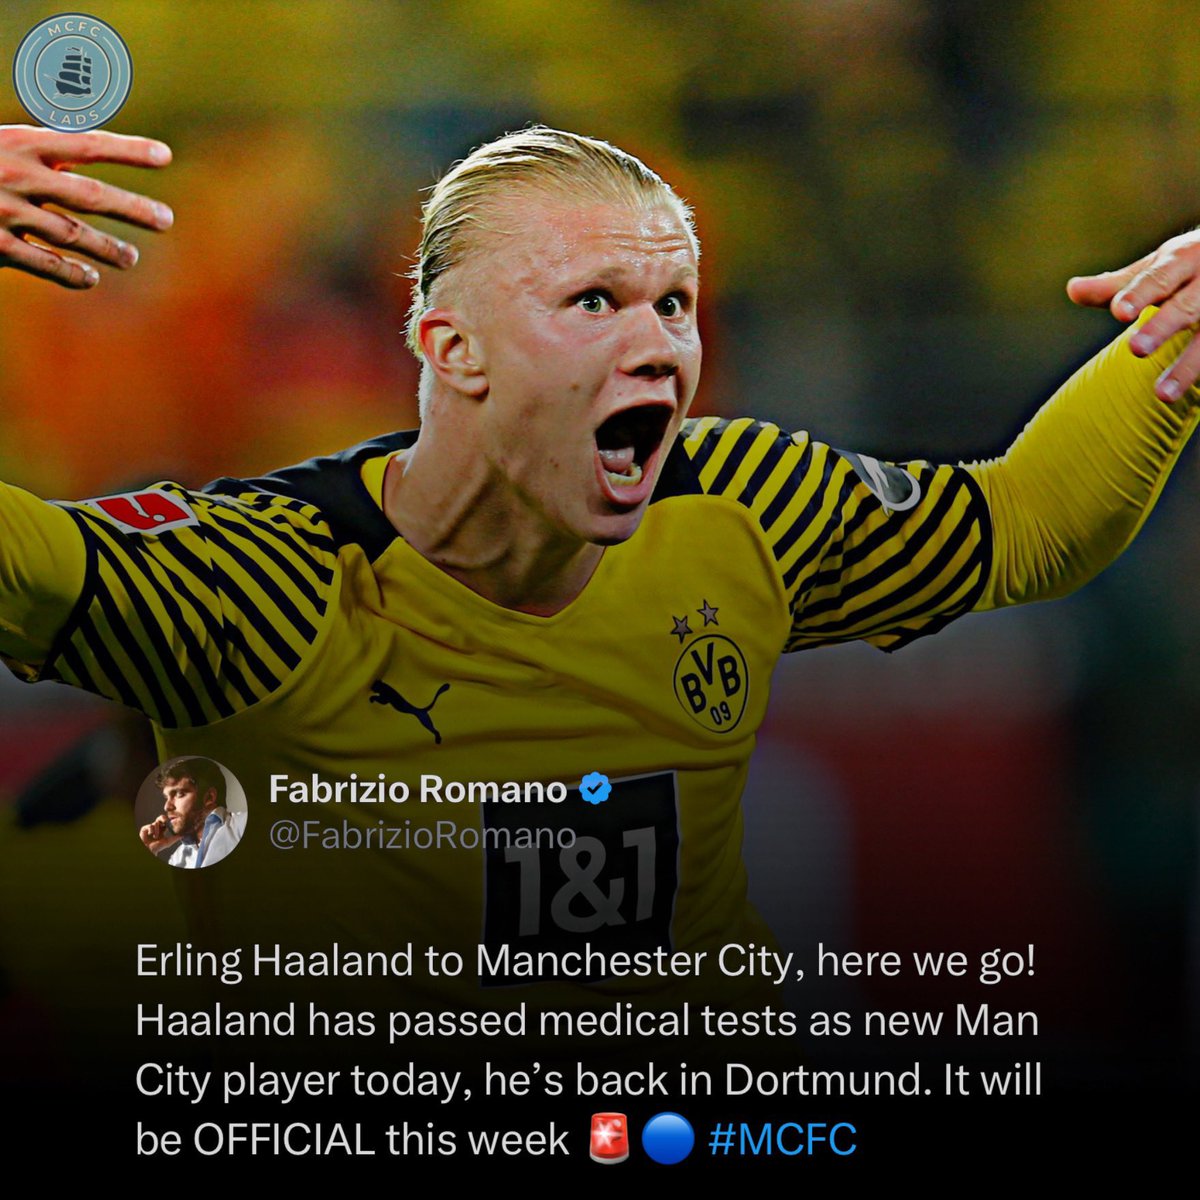 The Erling Haaland to Manchester City 𝙝𝙚𝙧𝙚 𝙬𝙚 𝙜𝙤 was dropped by @FabrizioRomano #OnThisDay in 2022! 😮‍💨🤖